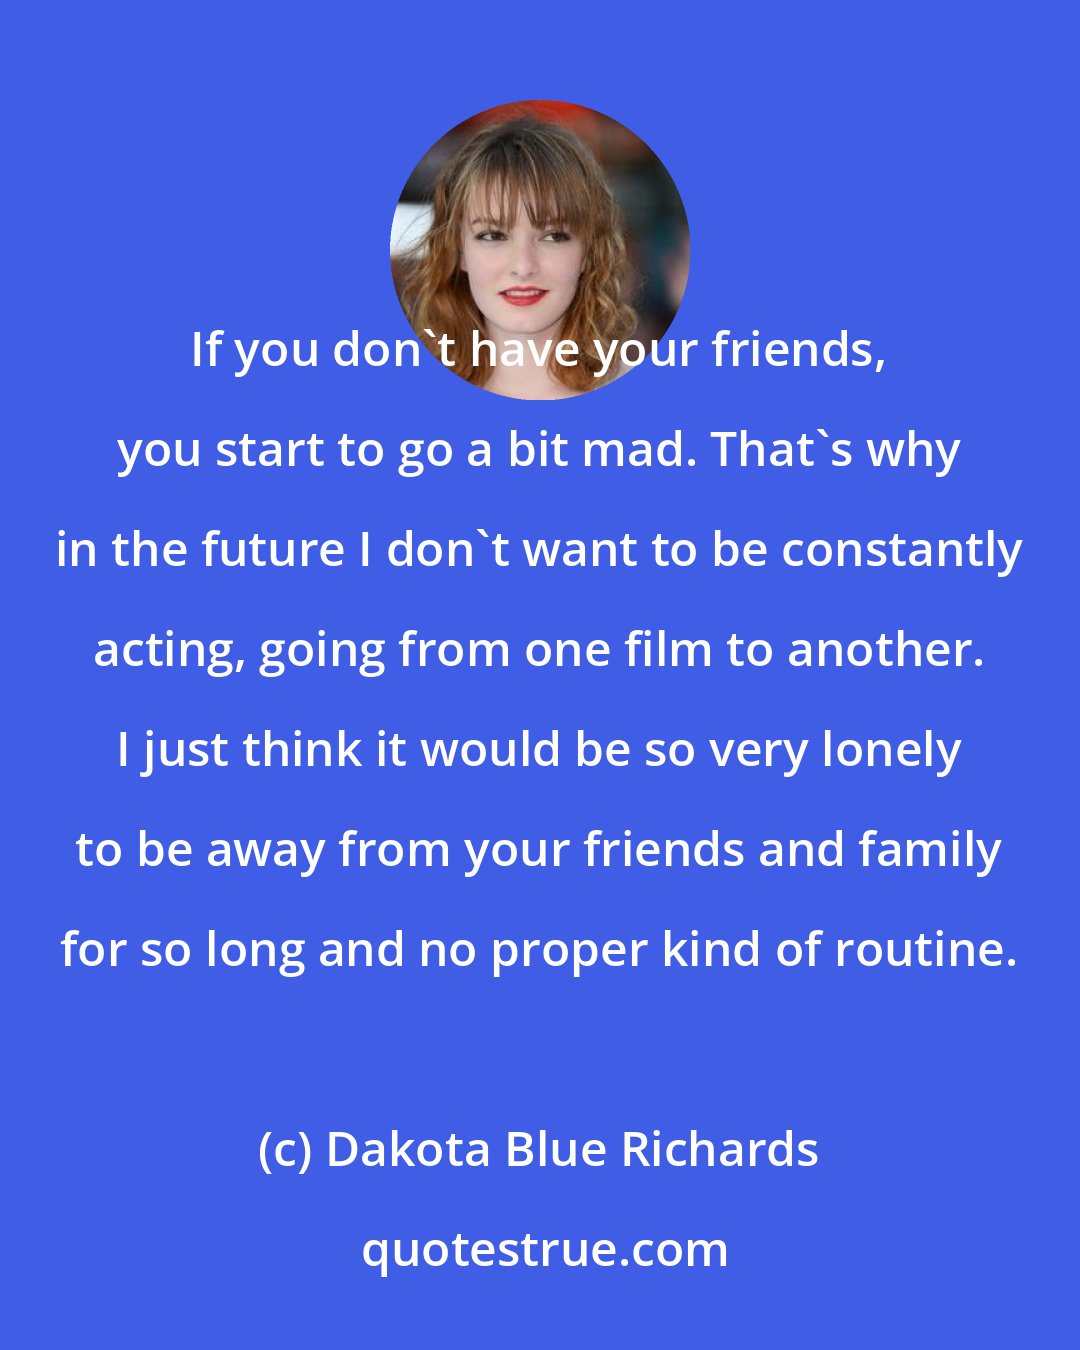 Dakota Blue Richards: If you don't have your friends, you start to go a bit mad. That's why in the future I don't want to be constantly acting, going from one film to another. I just think it would be so very lonely to be away from your friends and family for so long and no proper kind of routine.